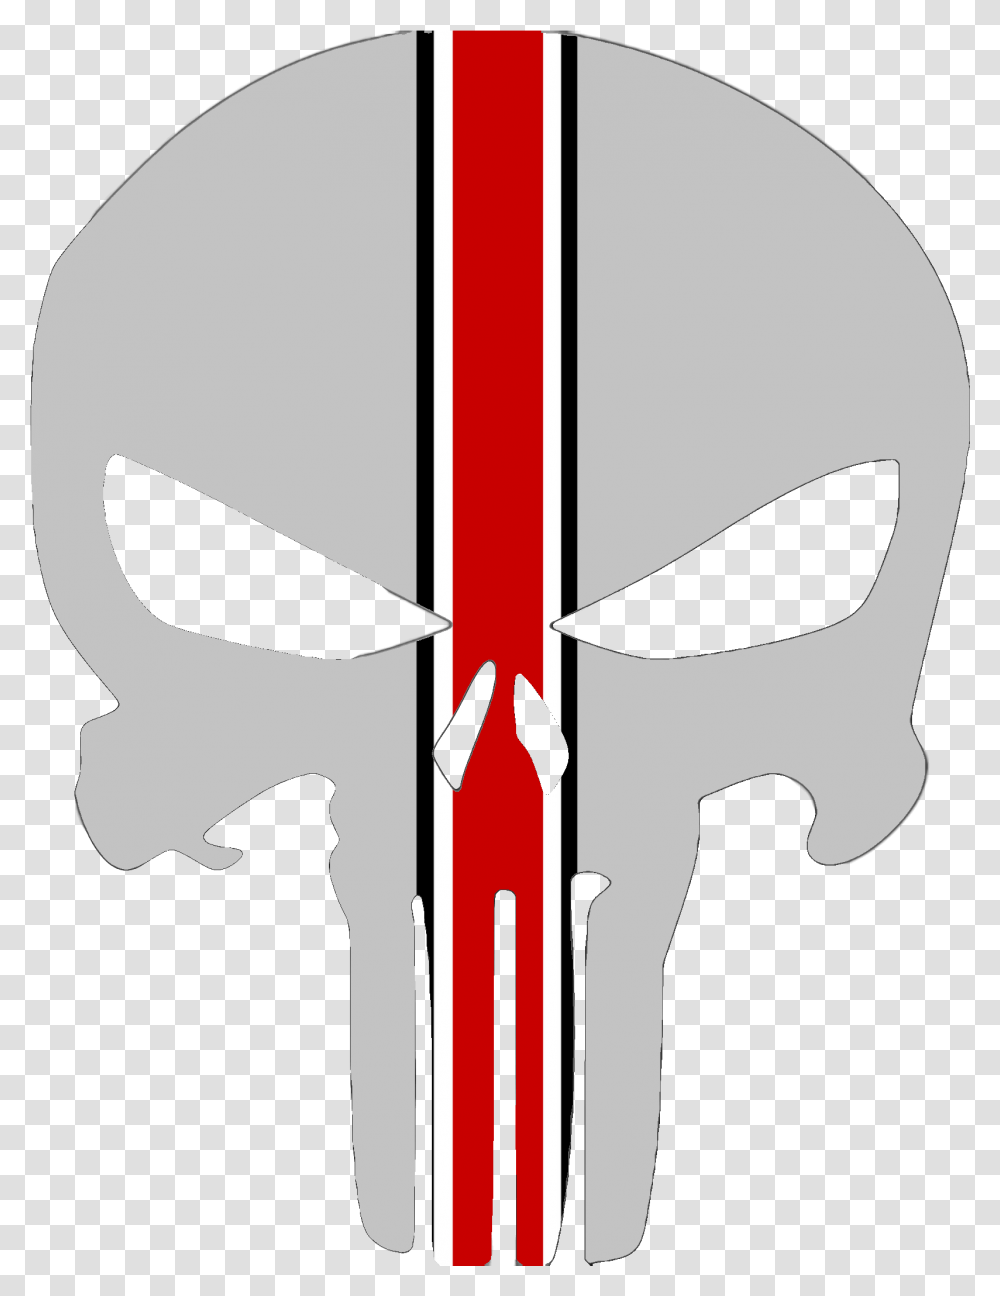 Skull Buck Eye Stripe Image Punisher Skull Red, Weapon, Weaponry, Arrow Transparent Png